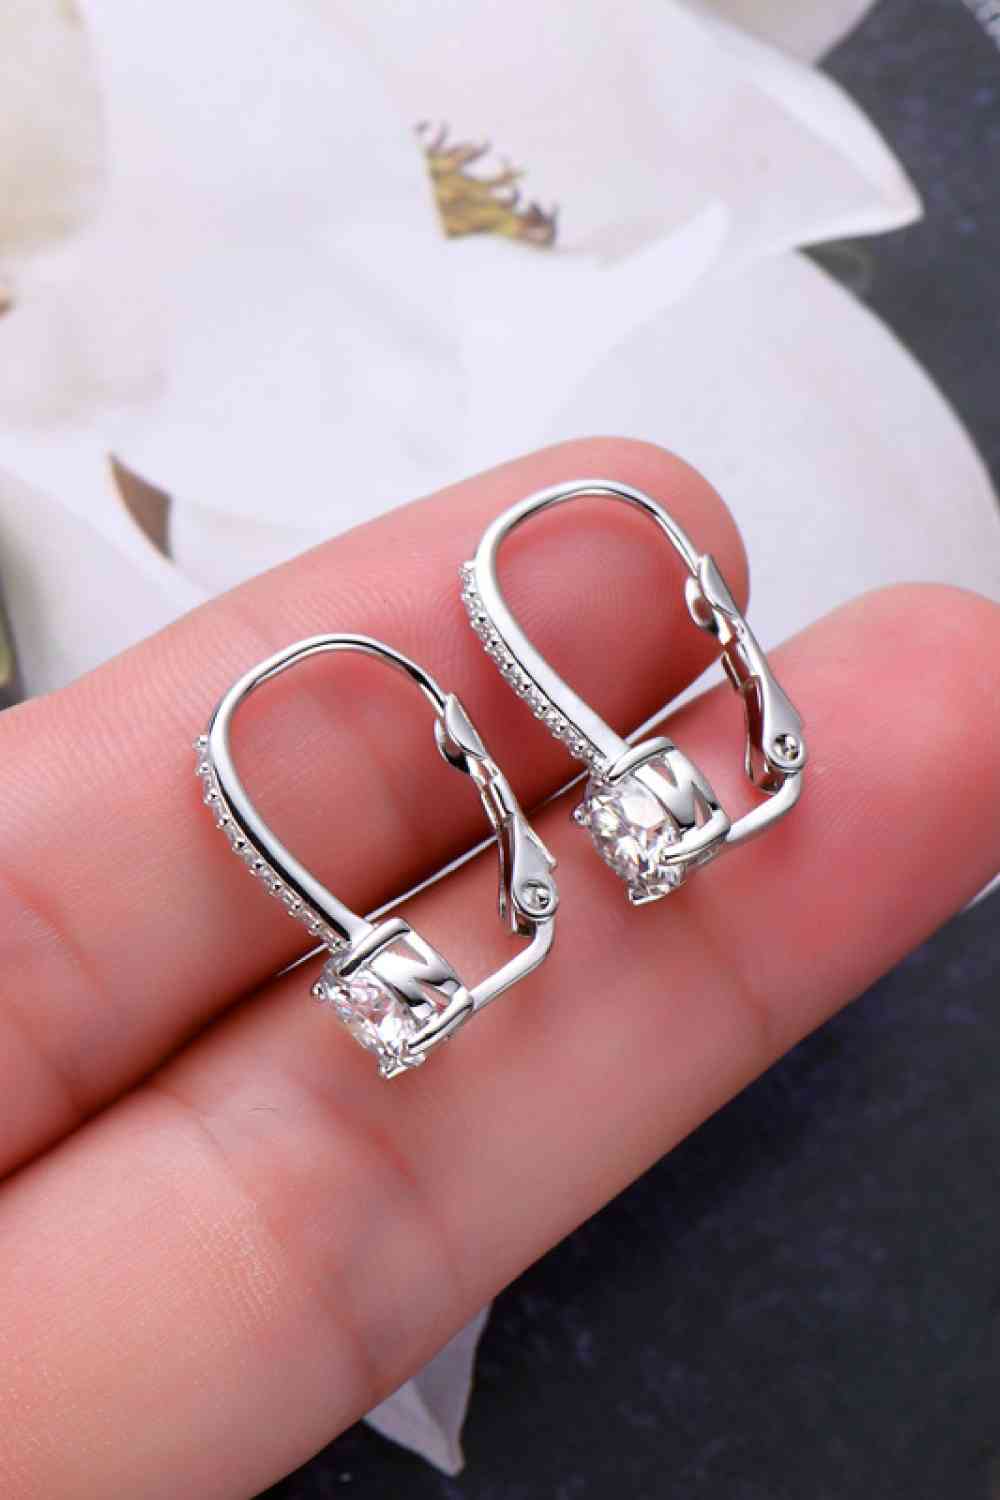 a pair of silver earrings on a person's hand